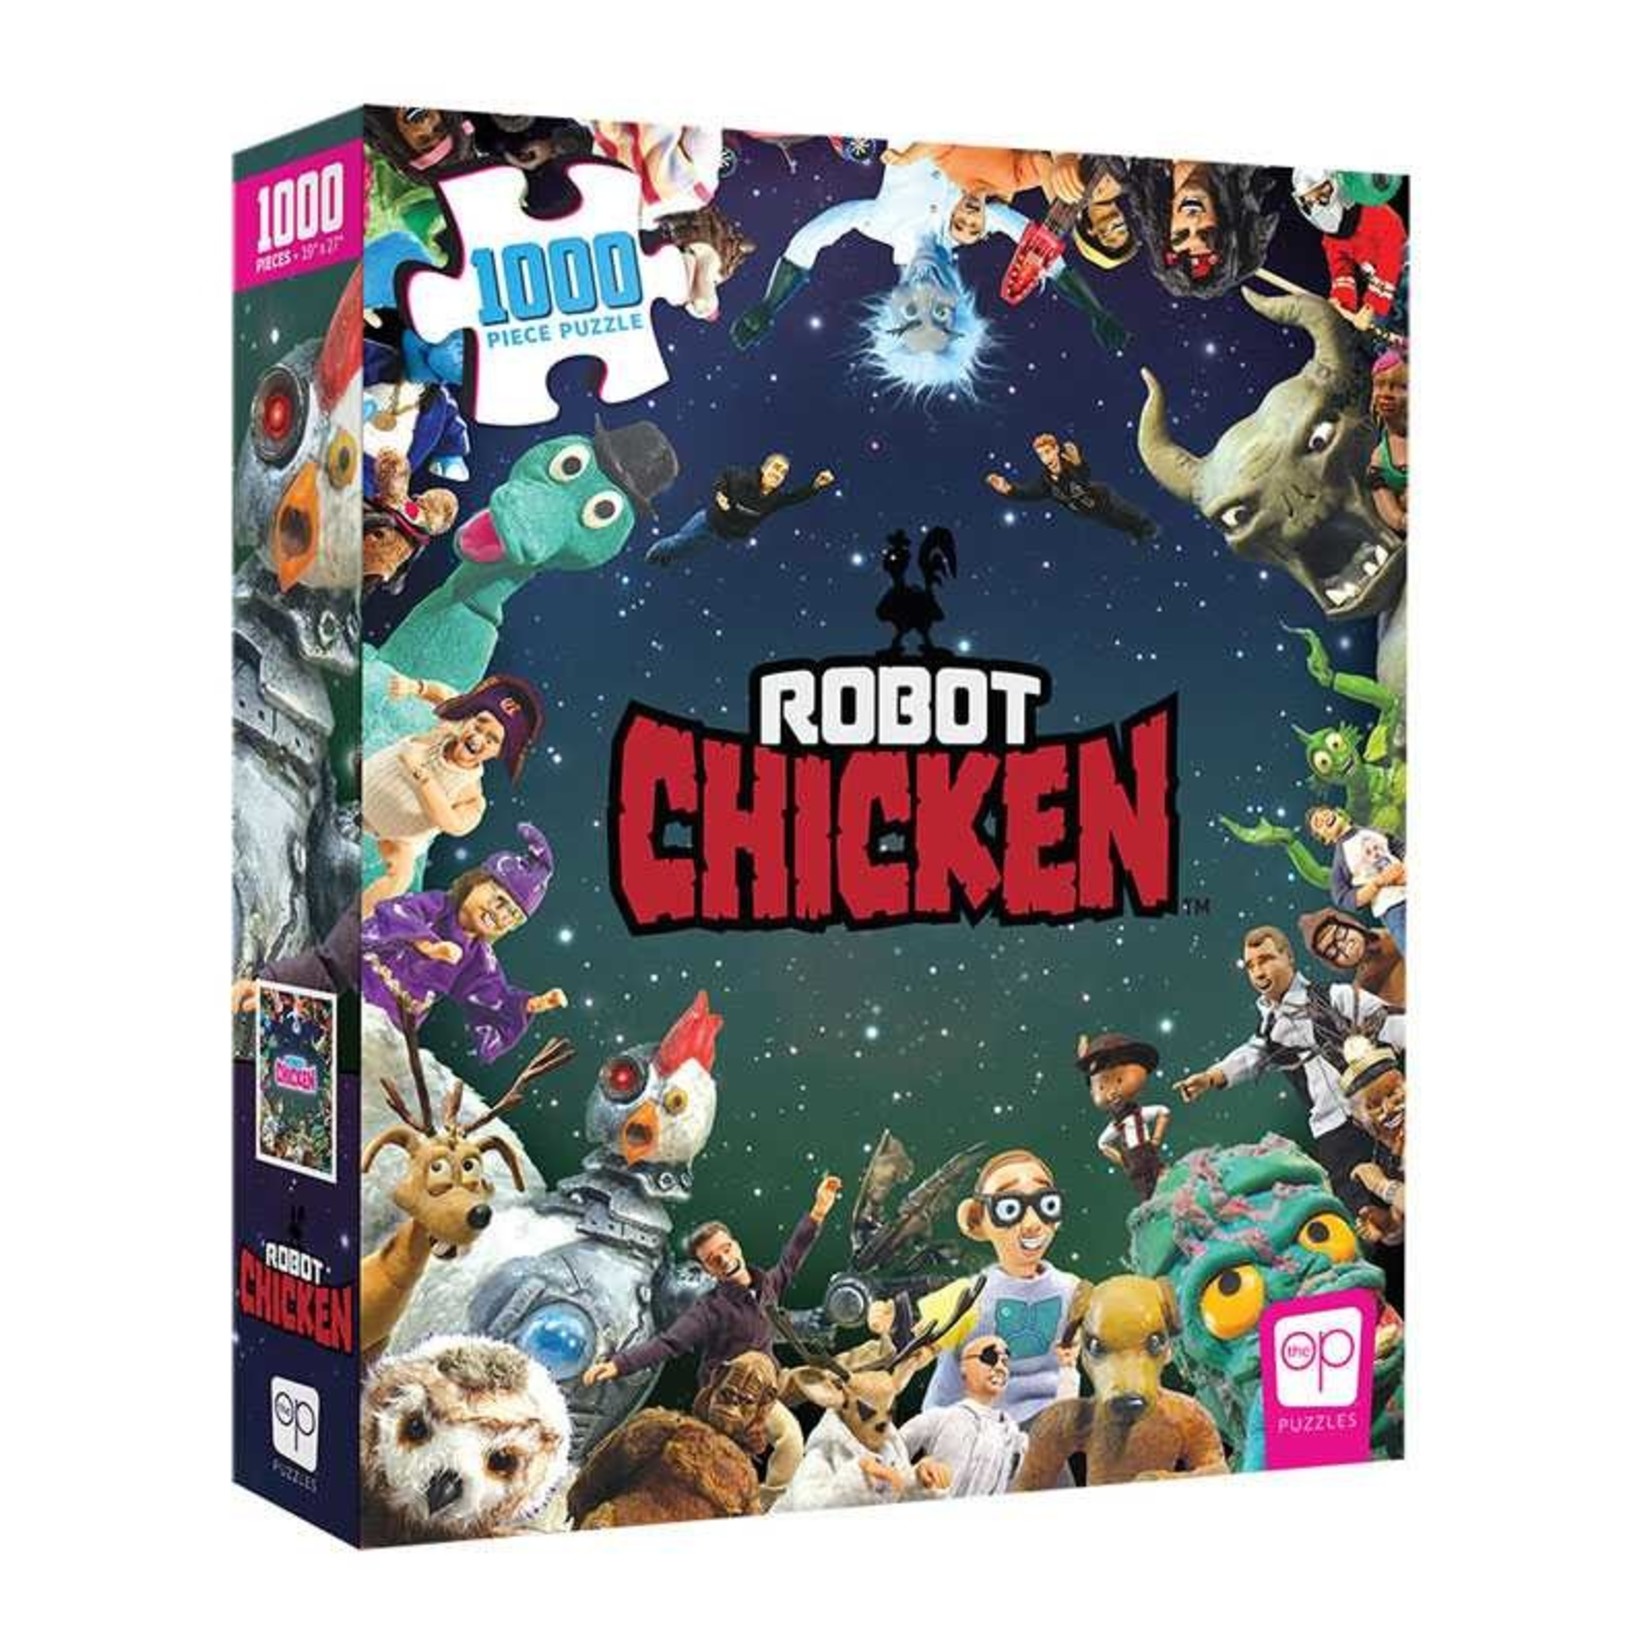 The Op Robot Chicken  It Was Only a Dream 1000 Piece Puzzle